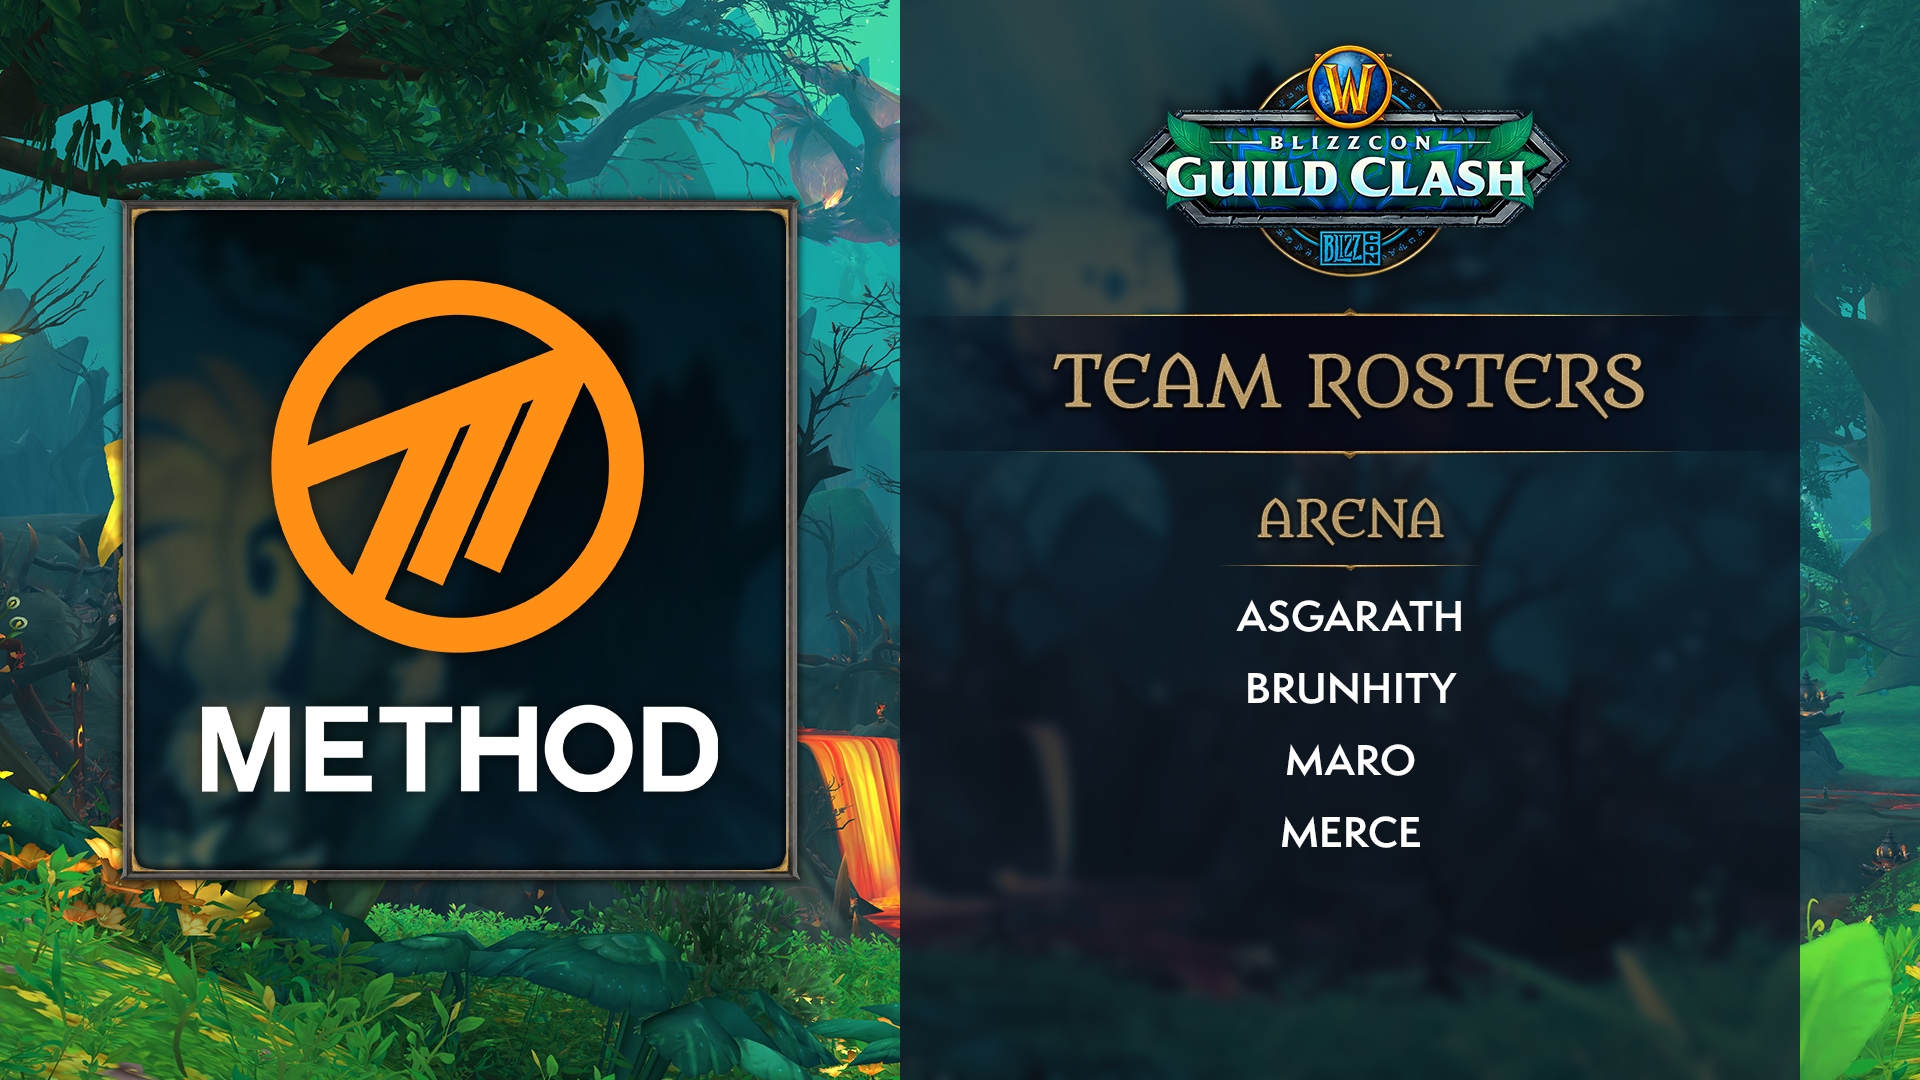 WoW_Esports_Blizzcon_GuildClash_TeamRoster_method_arena.png